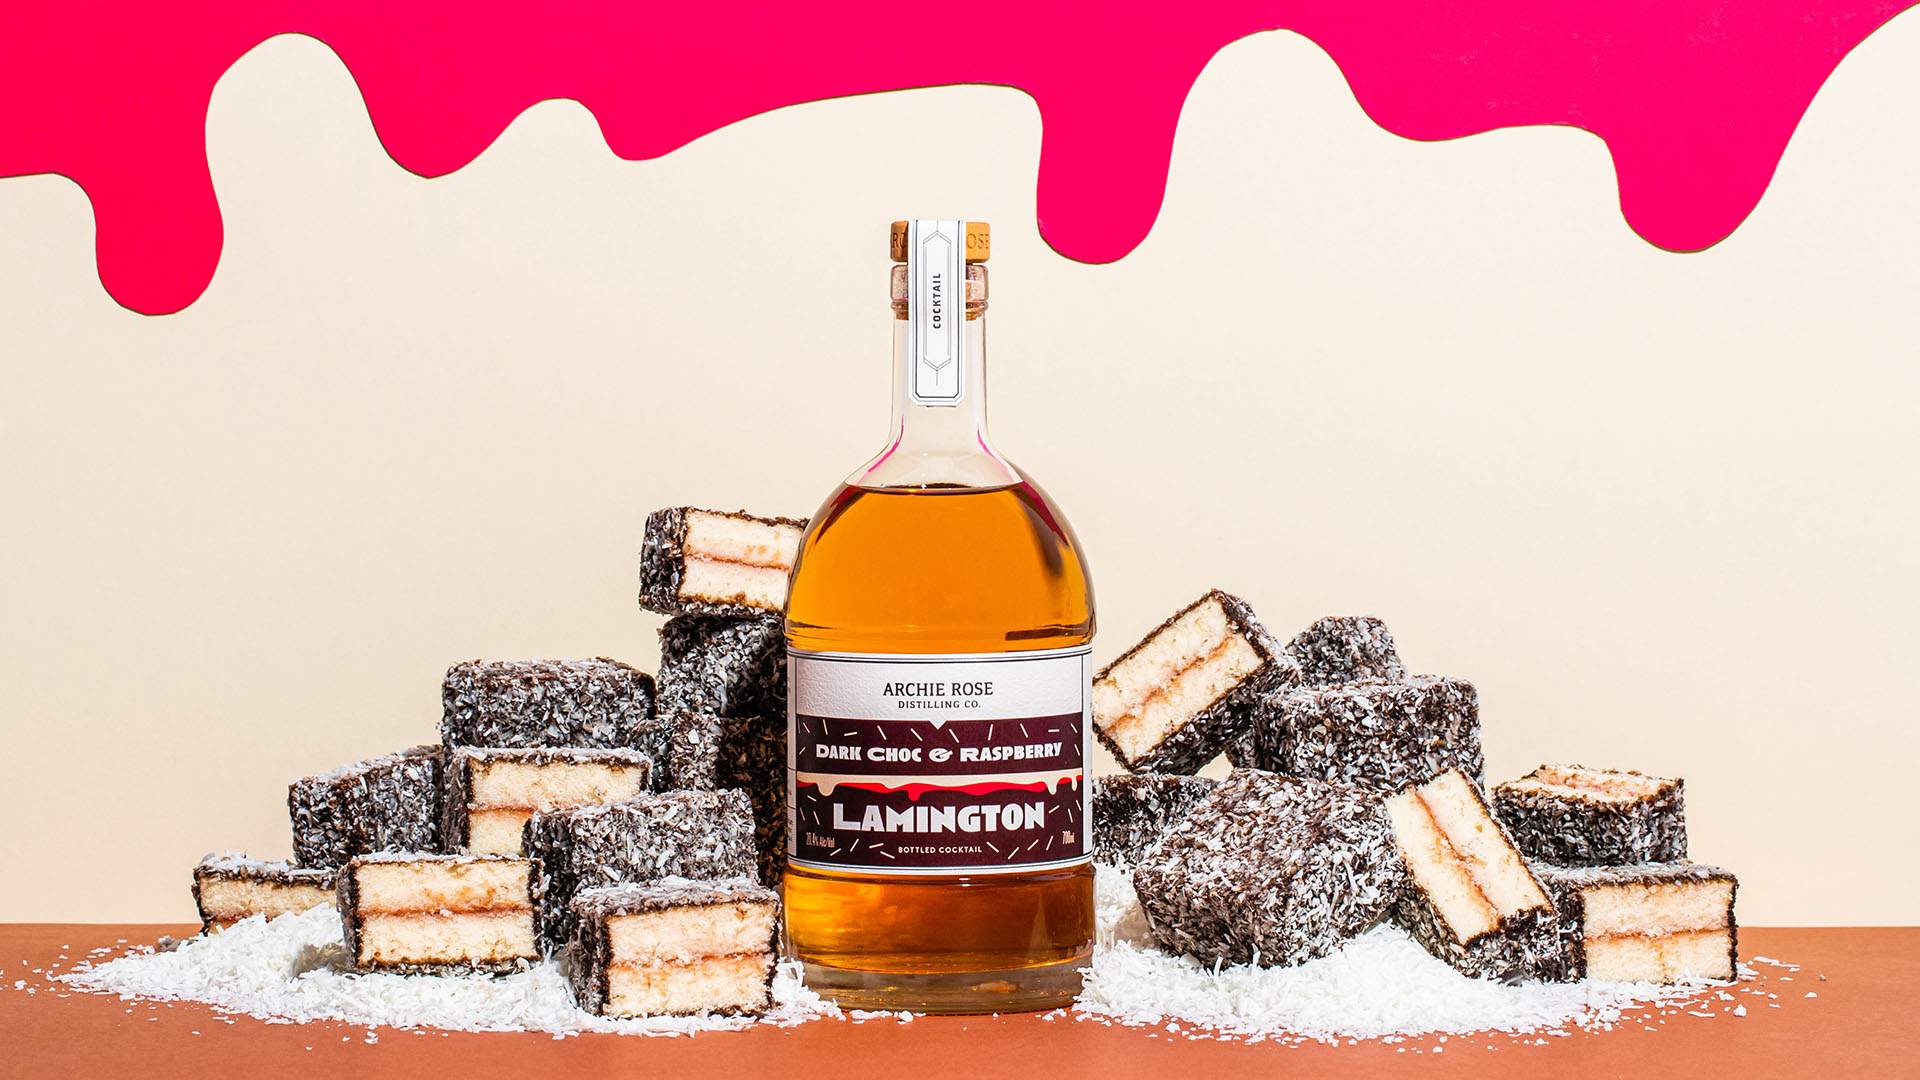 Archie Rose's Latest Tipple Is a Bottled Lamington Cocktail That's Landed Just in Time for Easter